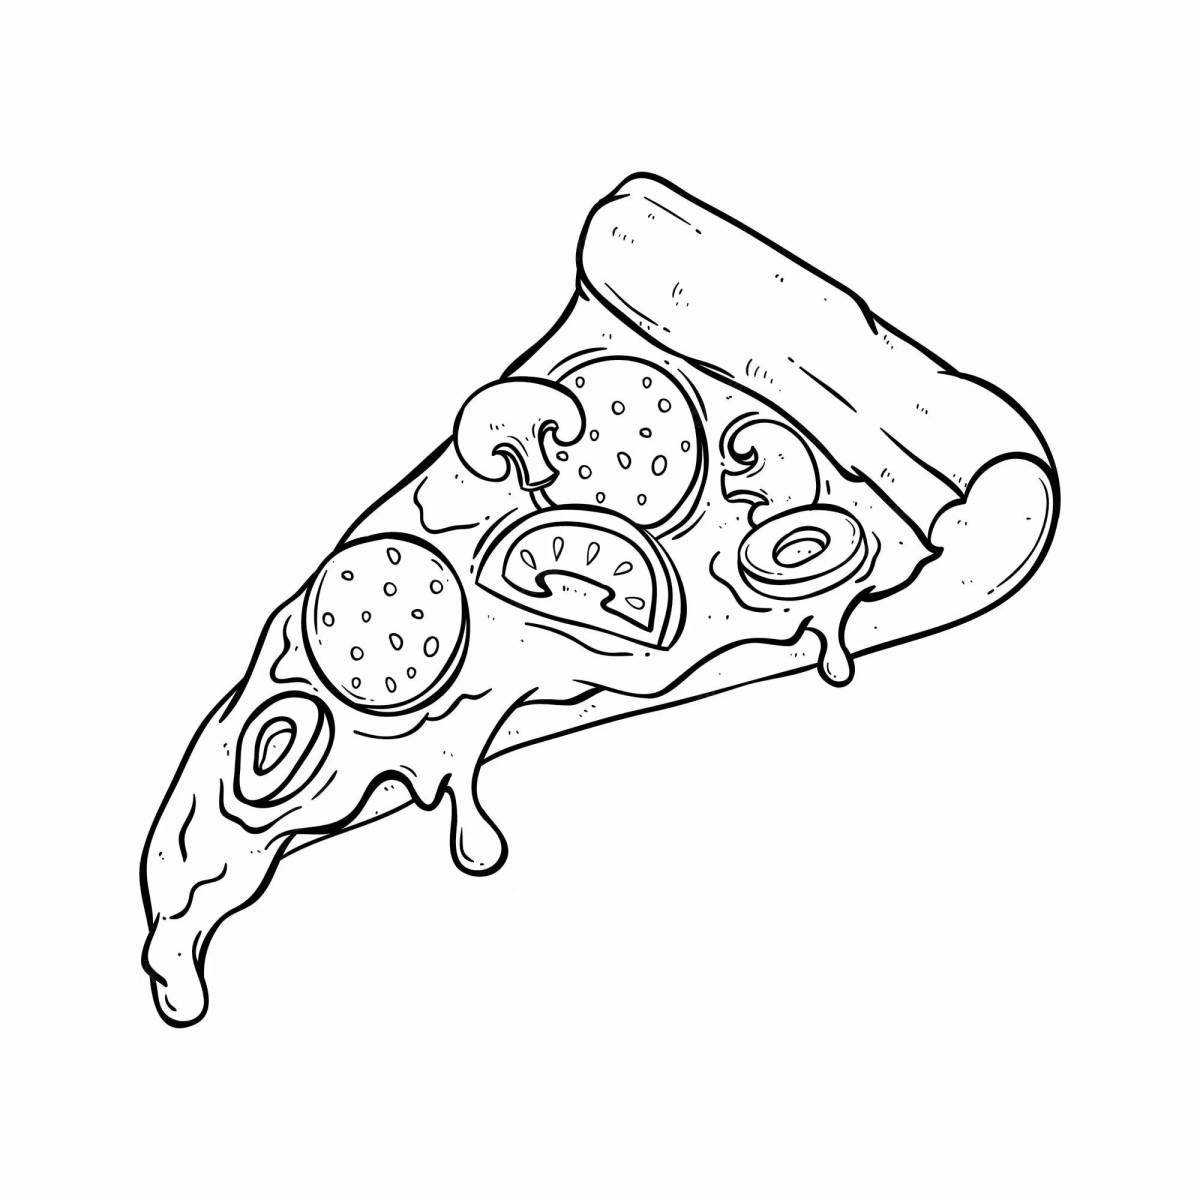 Sausage pizza live coloring page